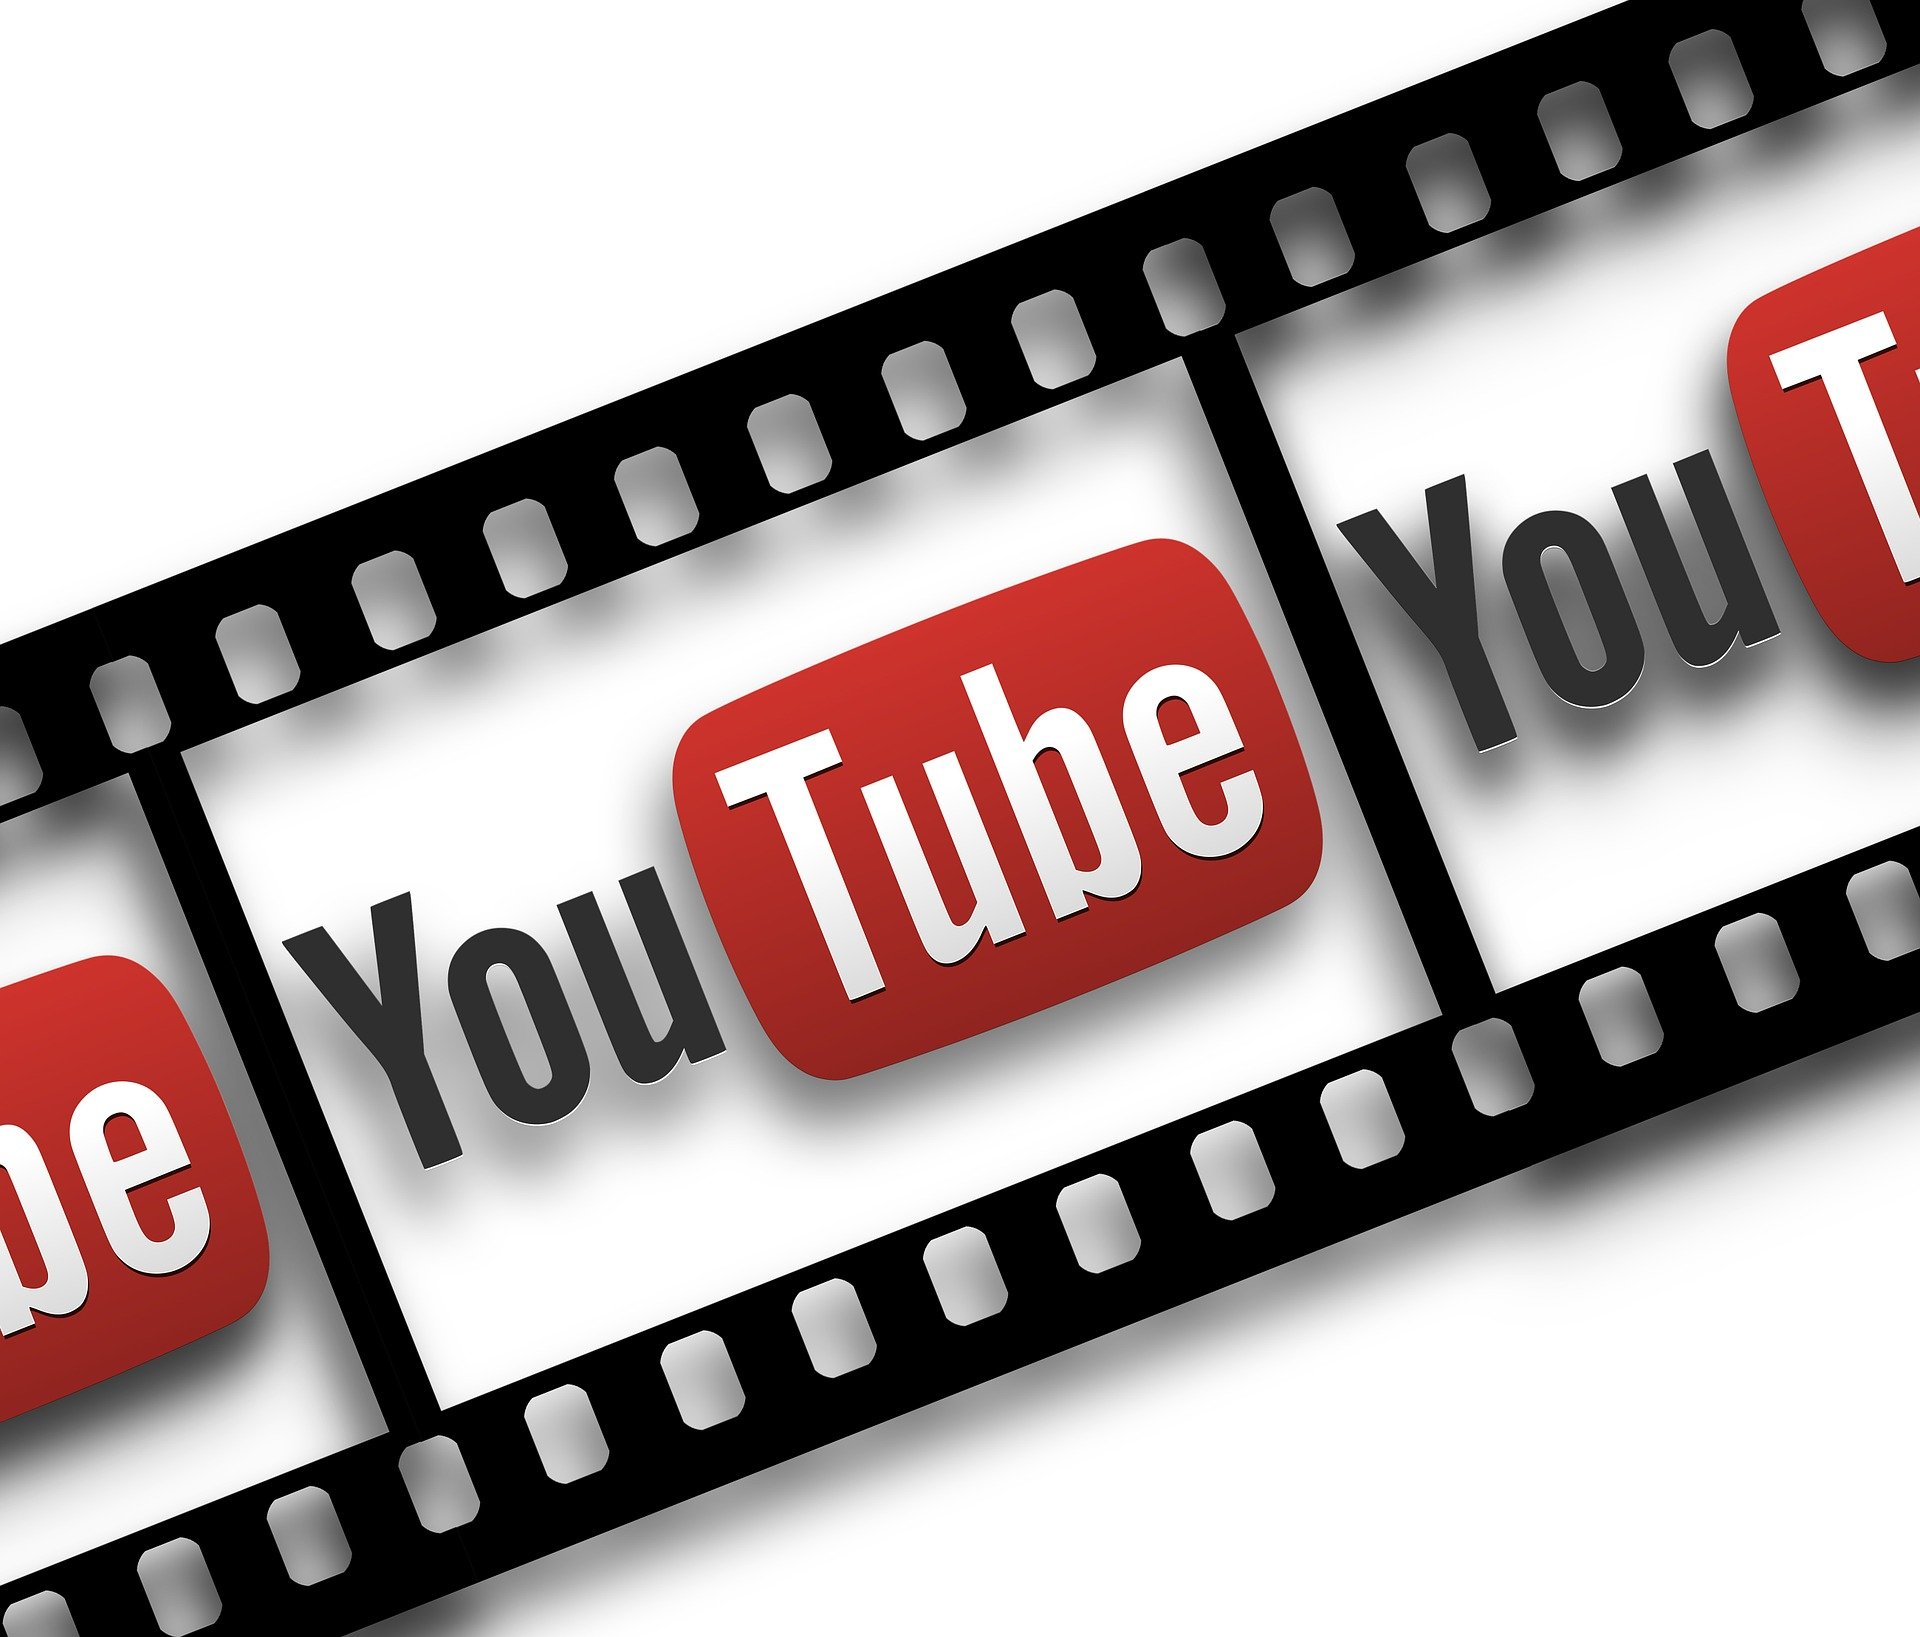 youtubers-residencia-fiscal